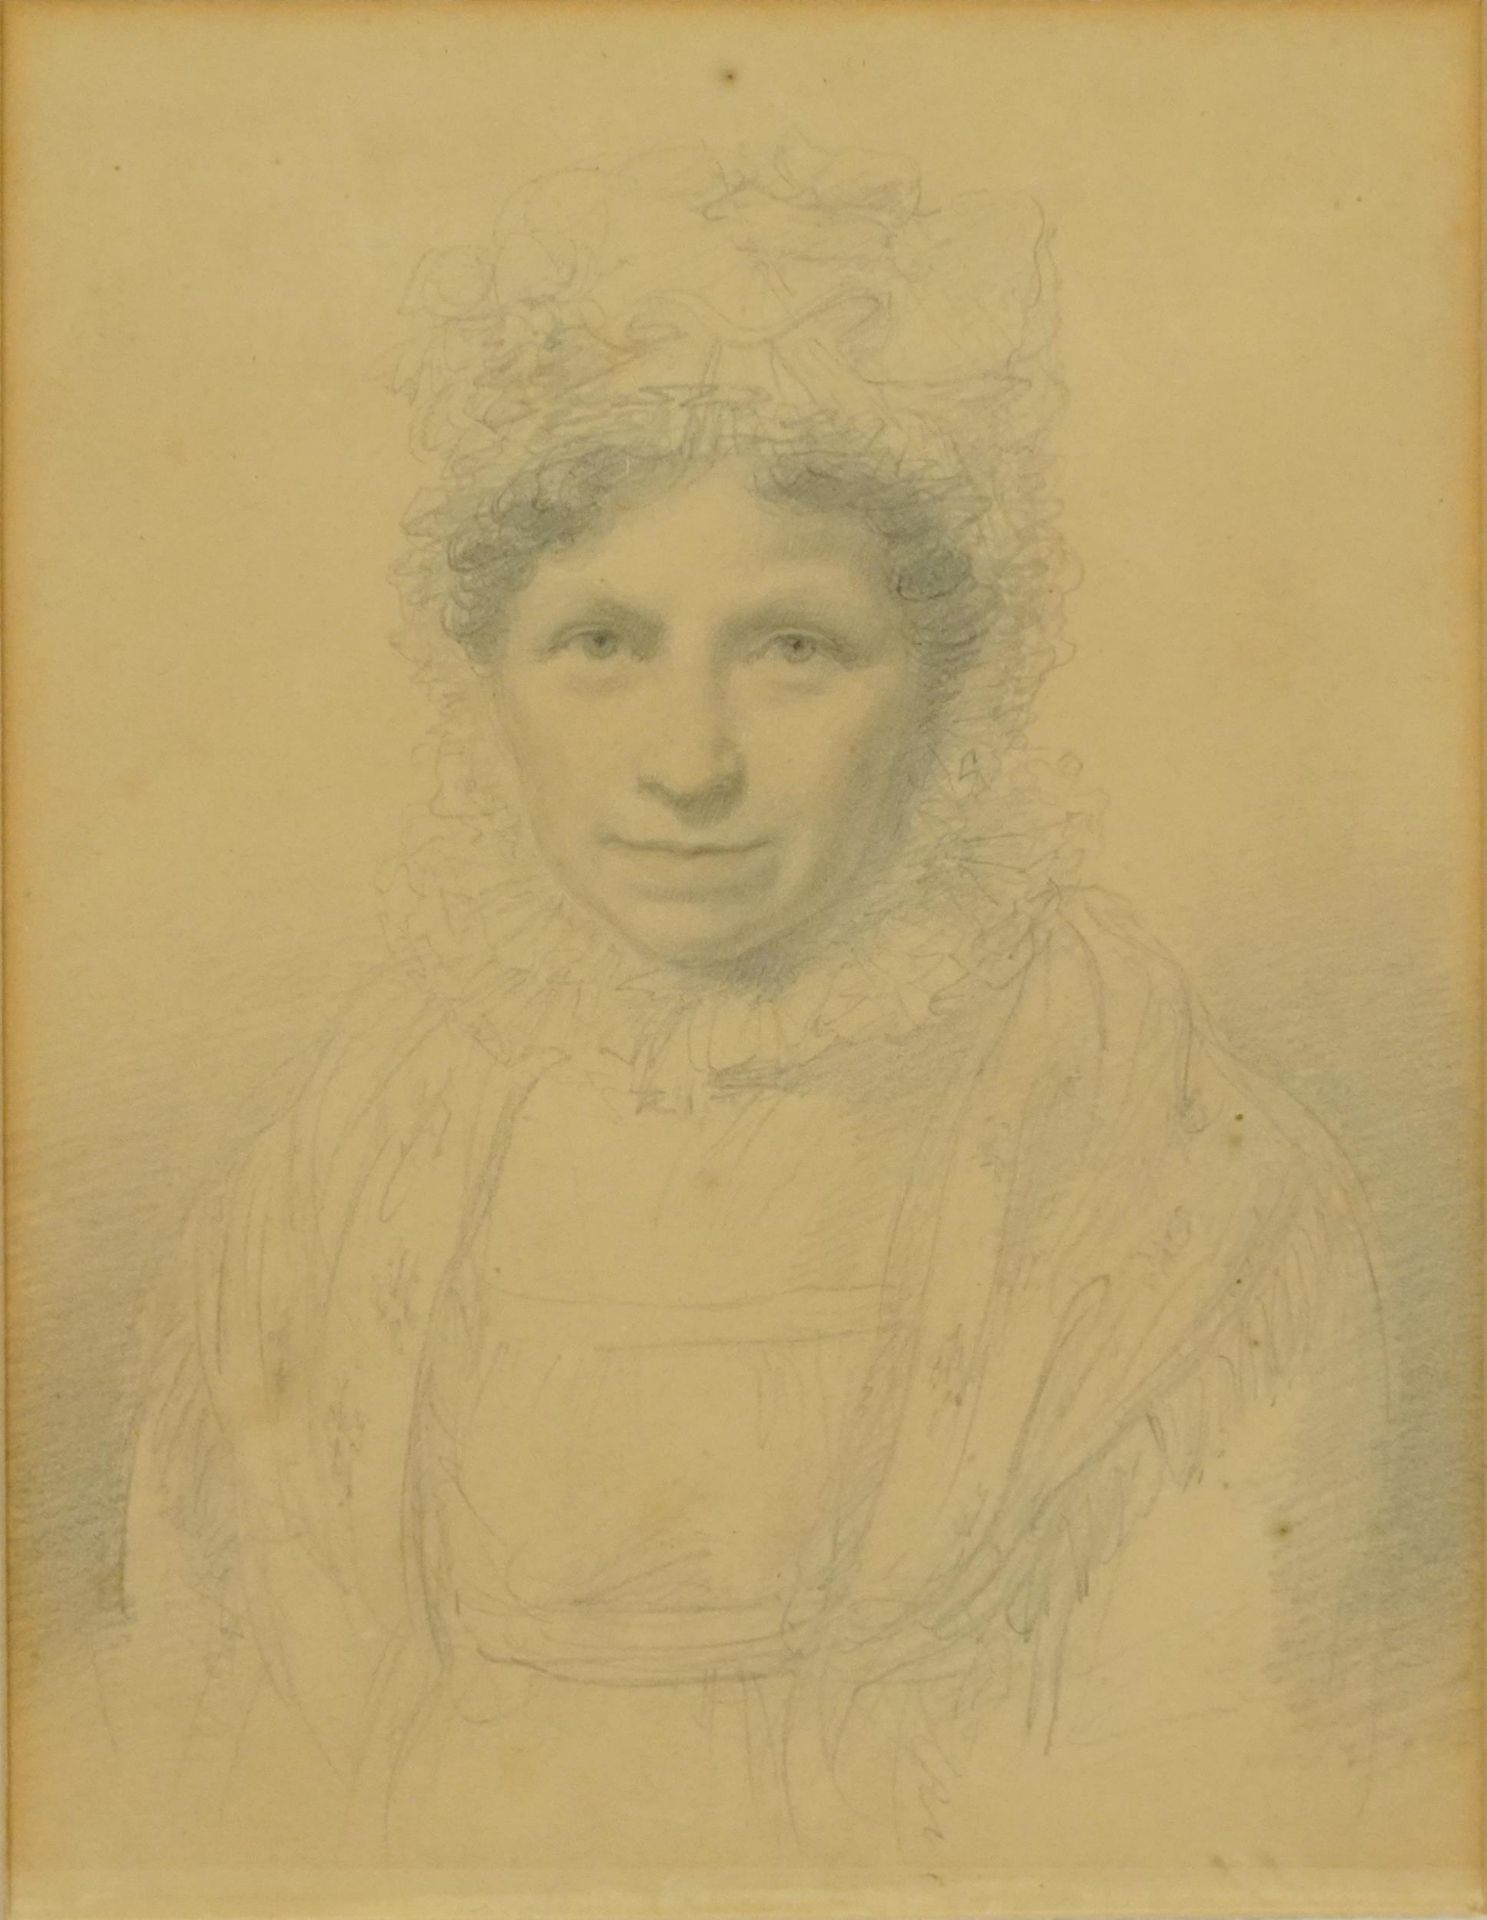 Head and shoulders portrait of a female wearing a shawl and bonnet, late 18th/early 19th century